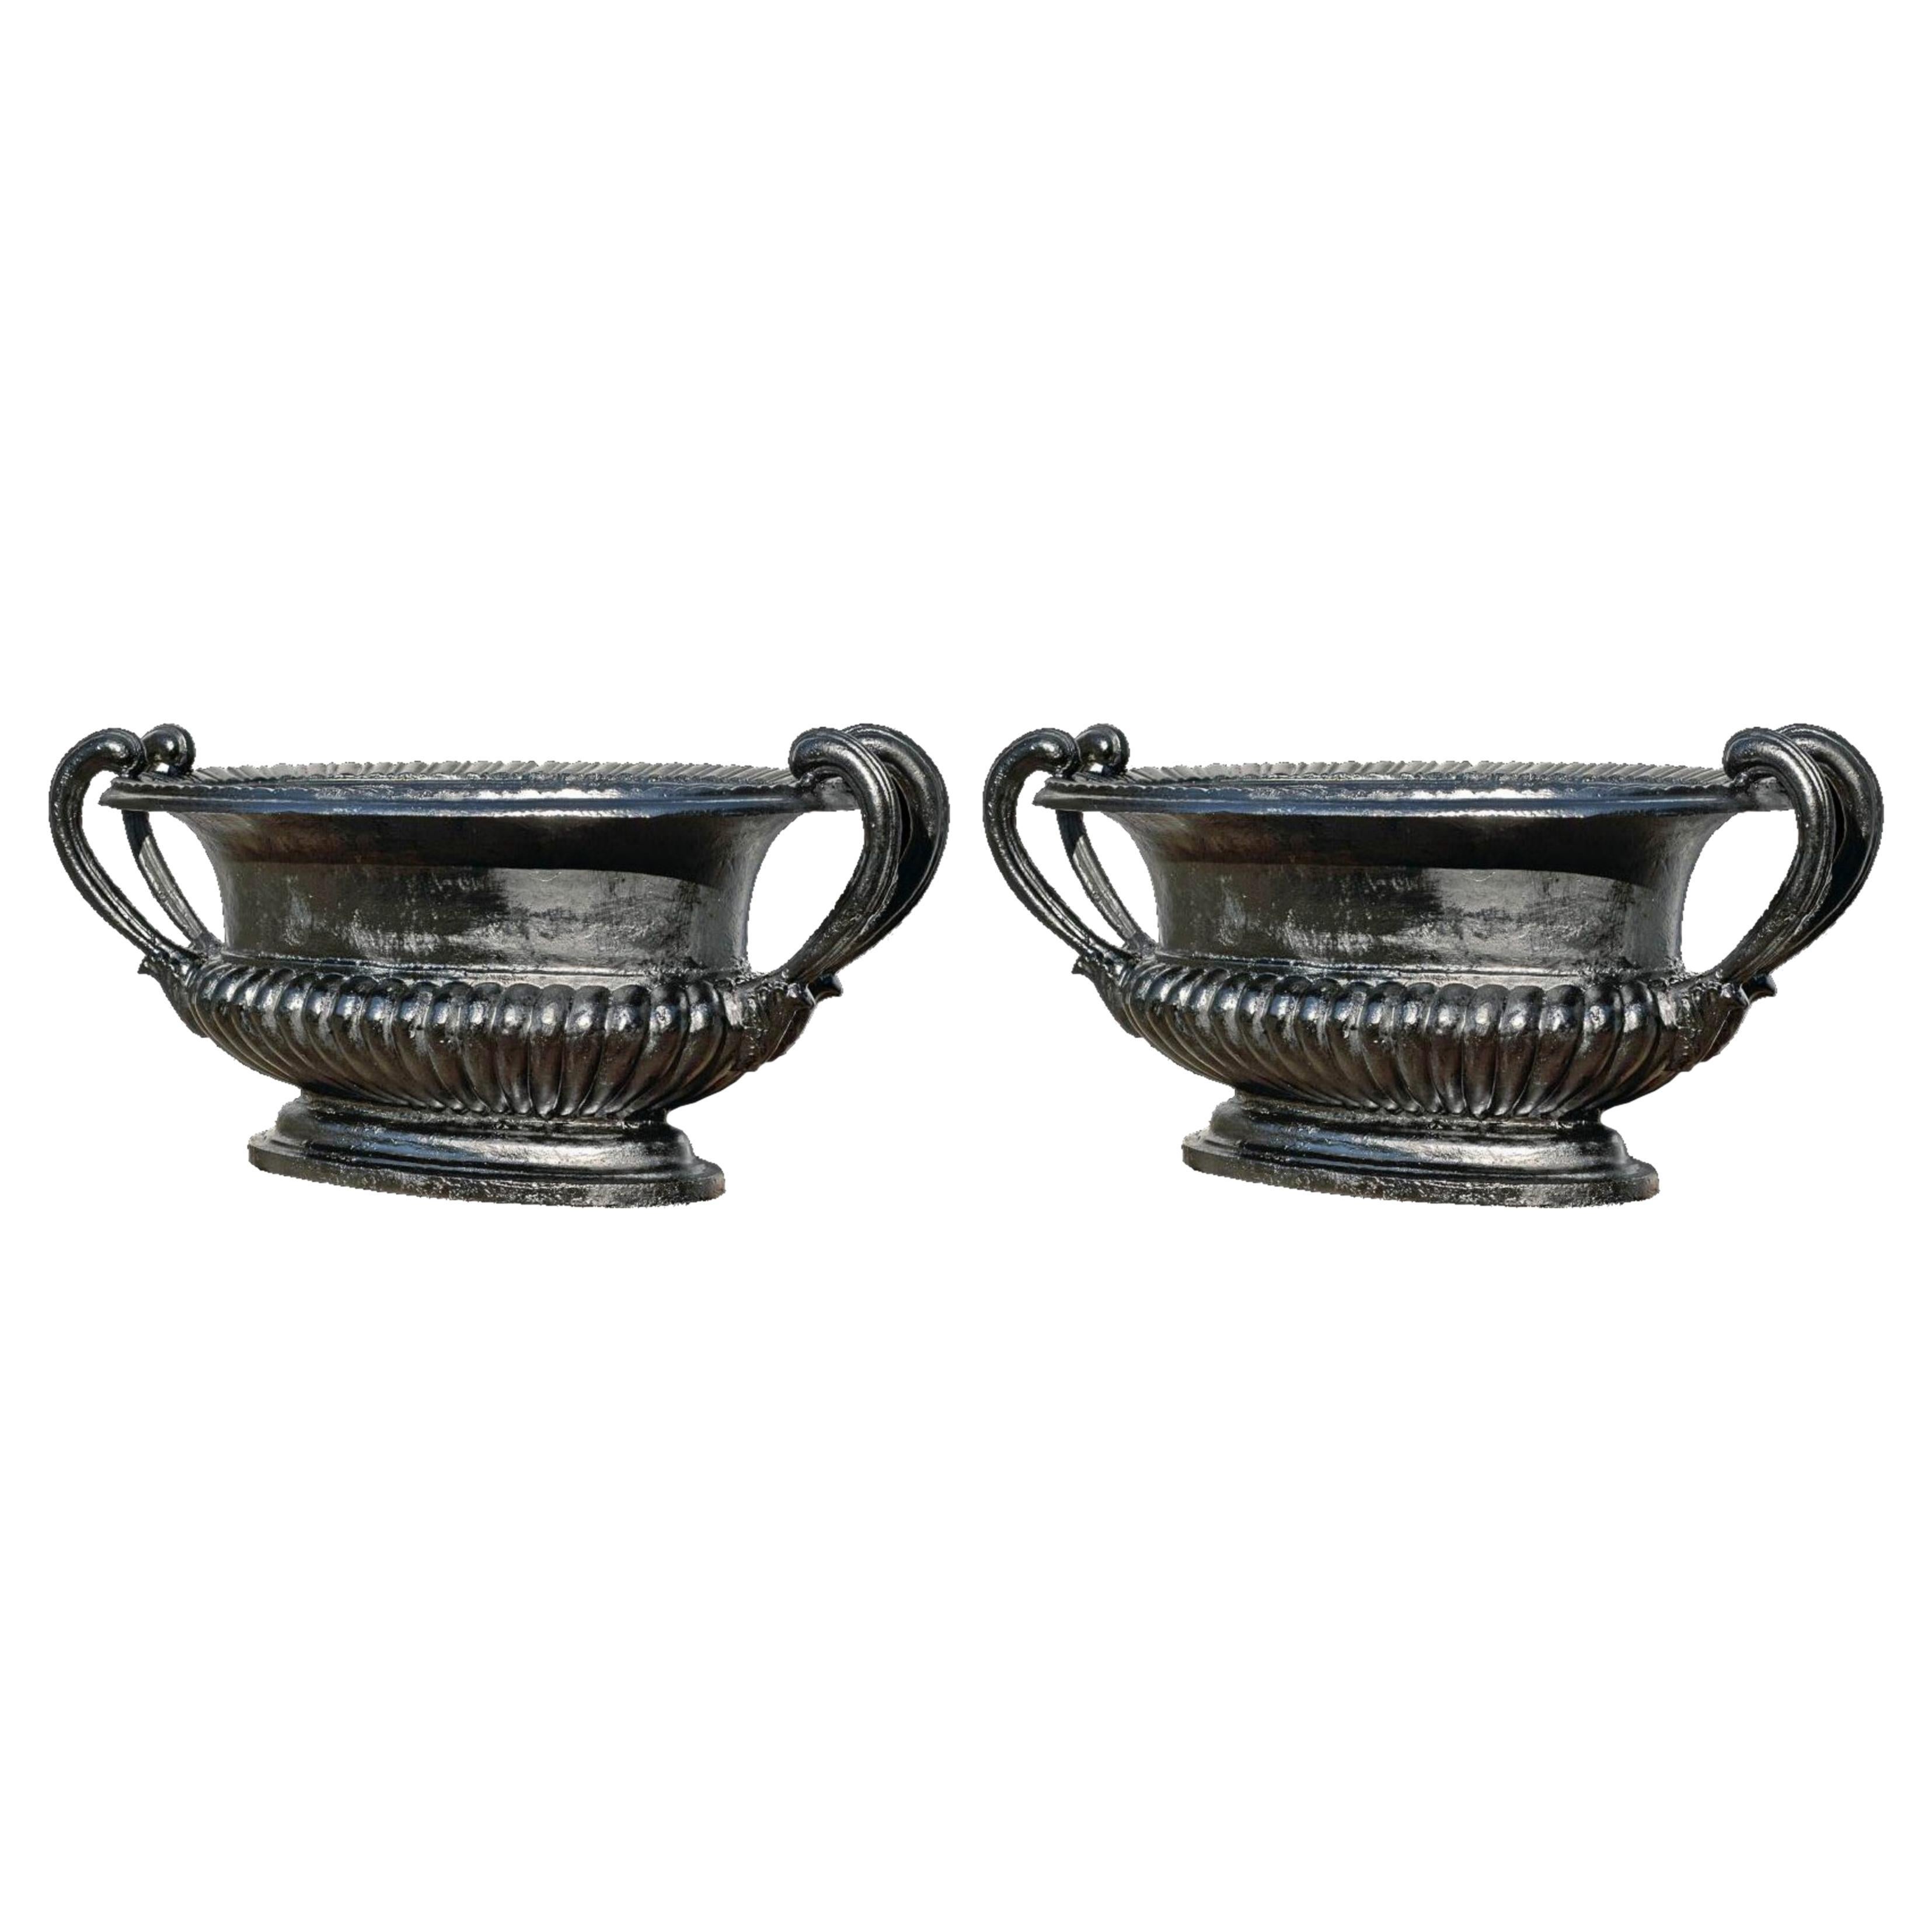 Pair of Medici - Tuscany Pot with Handles Early 20th Century